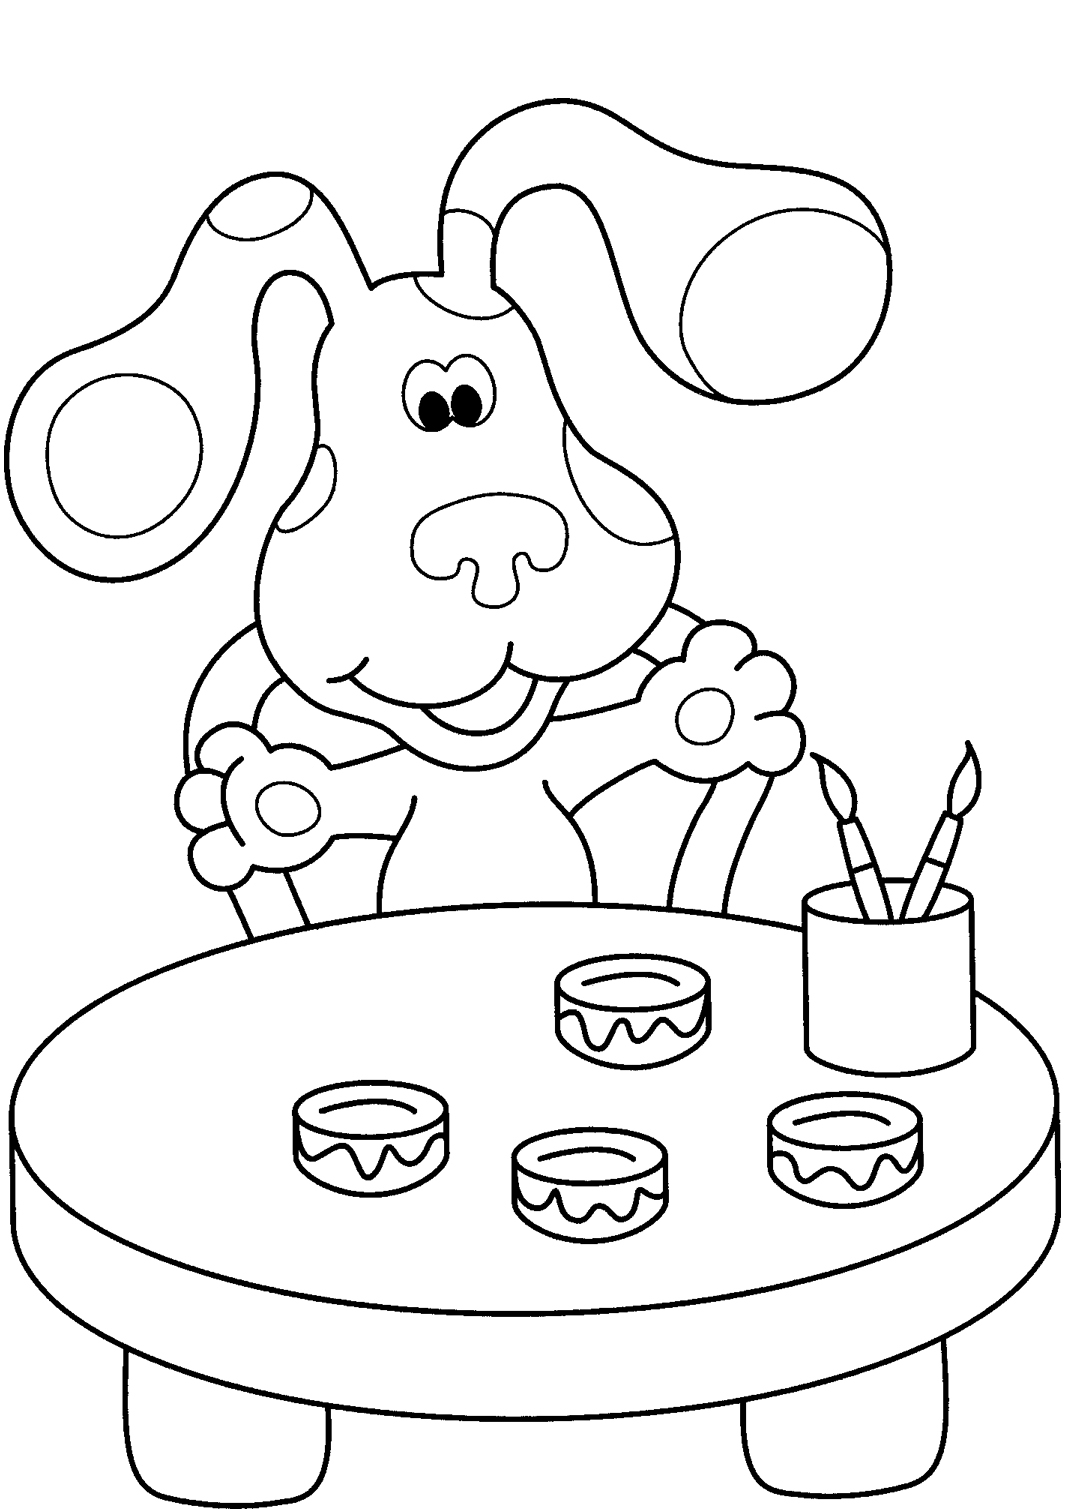 90s nickelodeon coloring pages